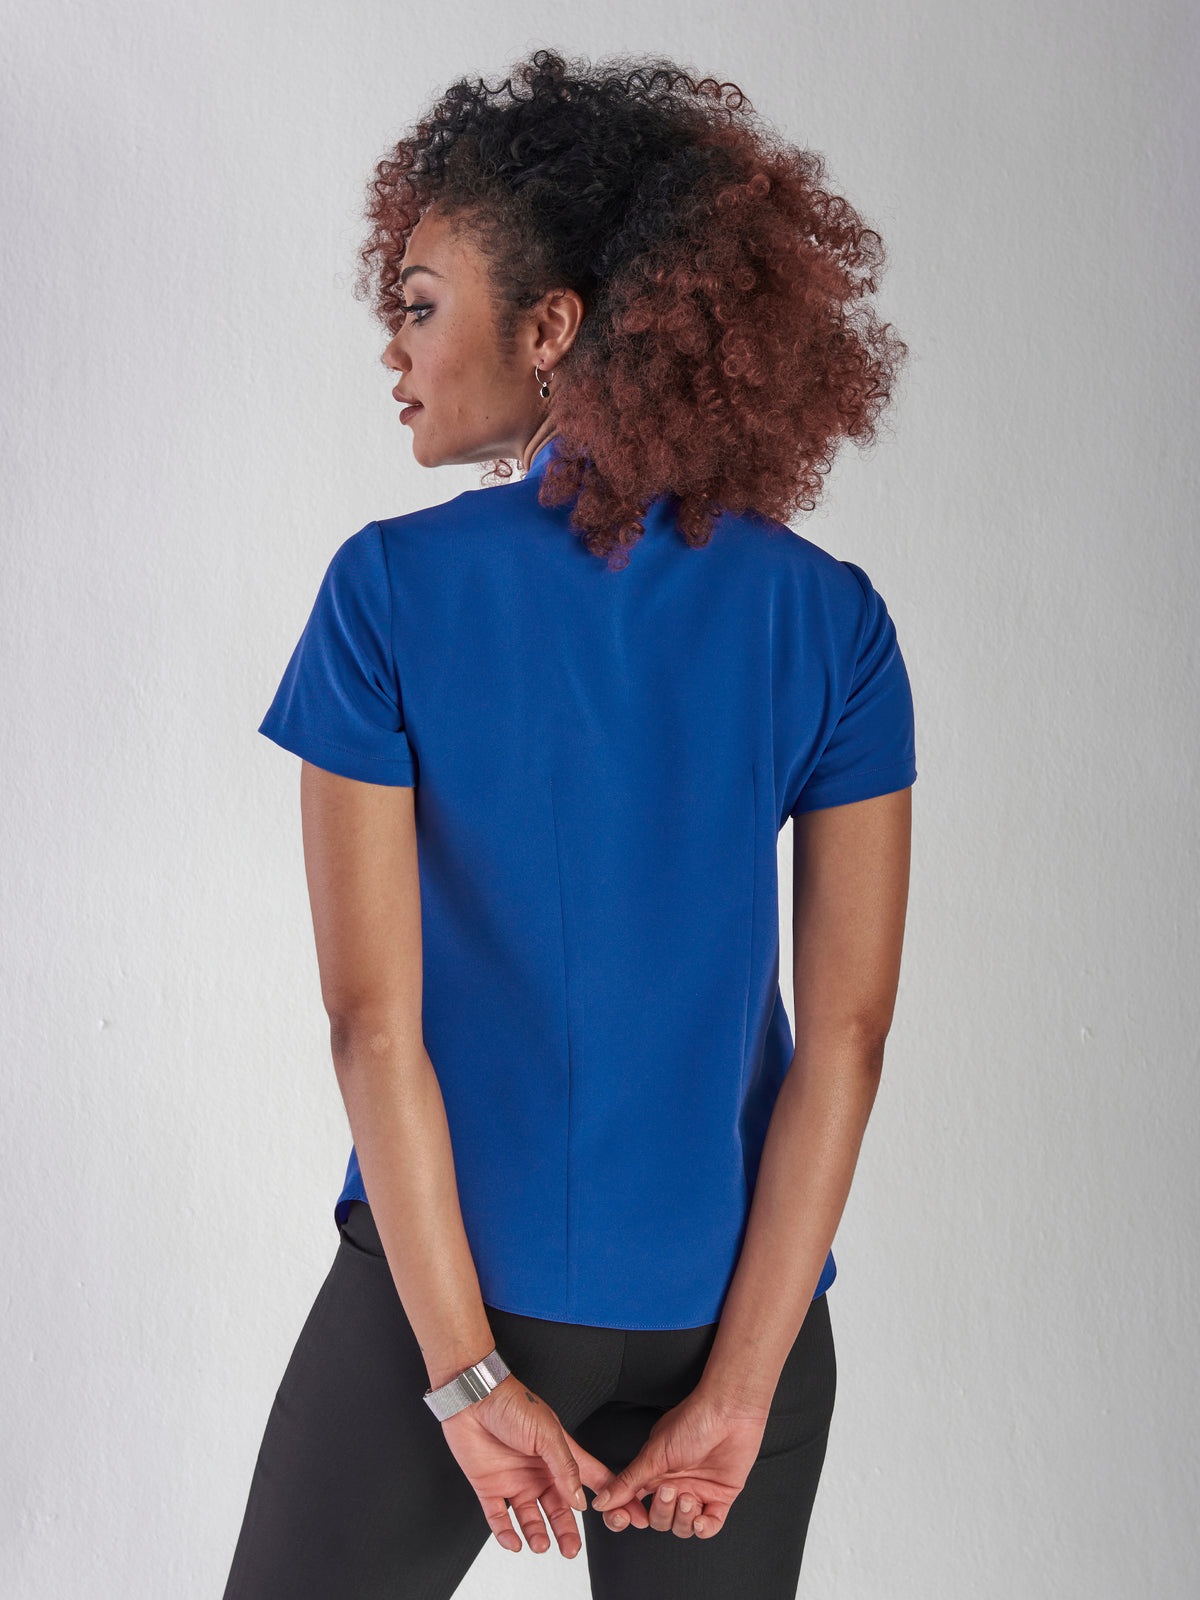 Carrie classic buttoned shirt - bright blue